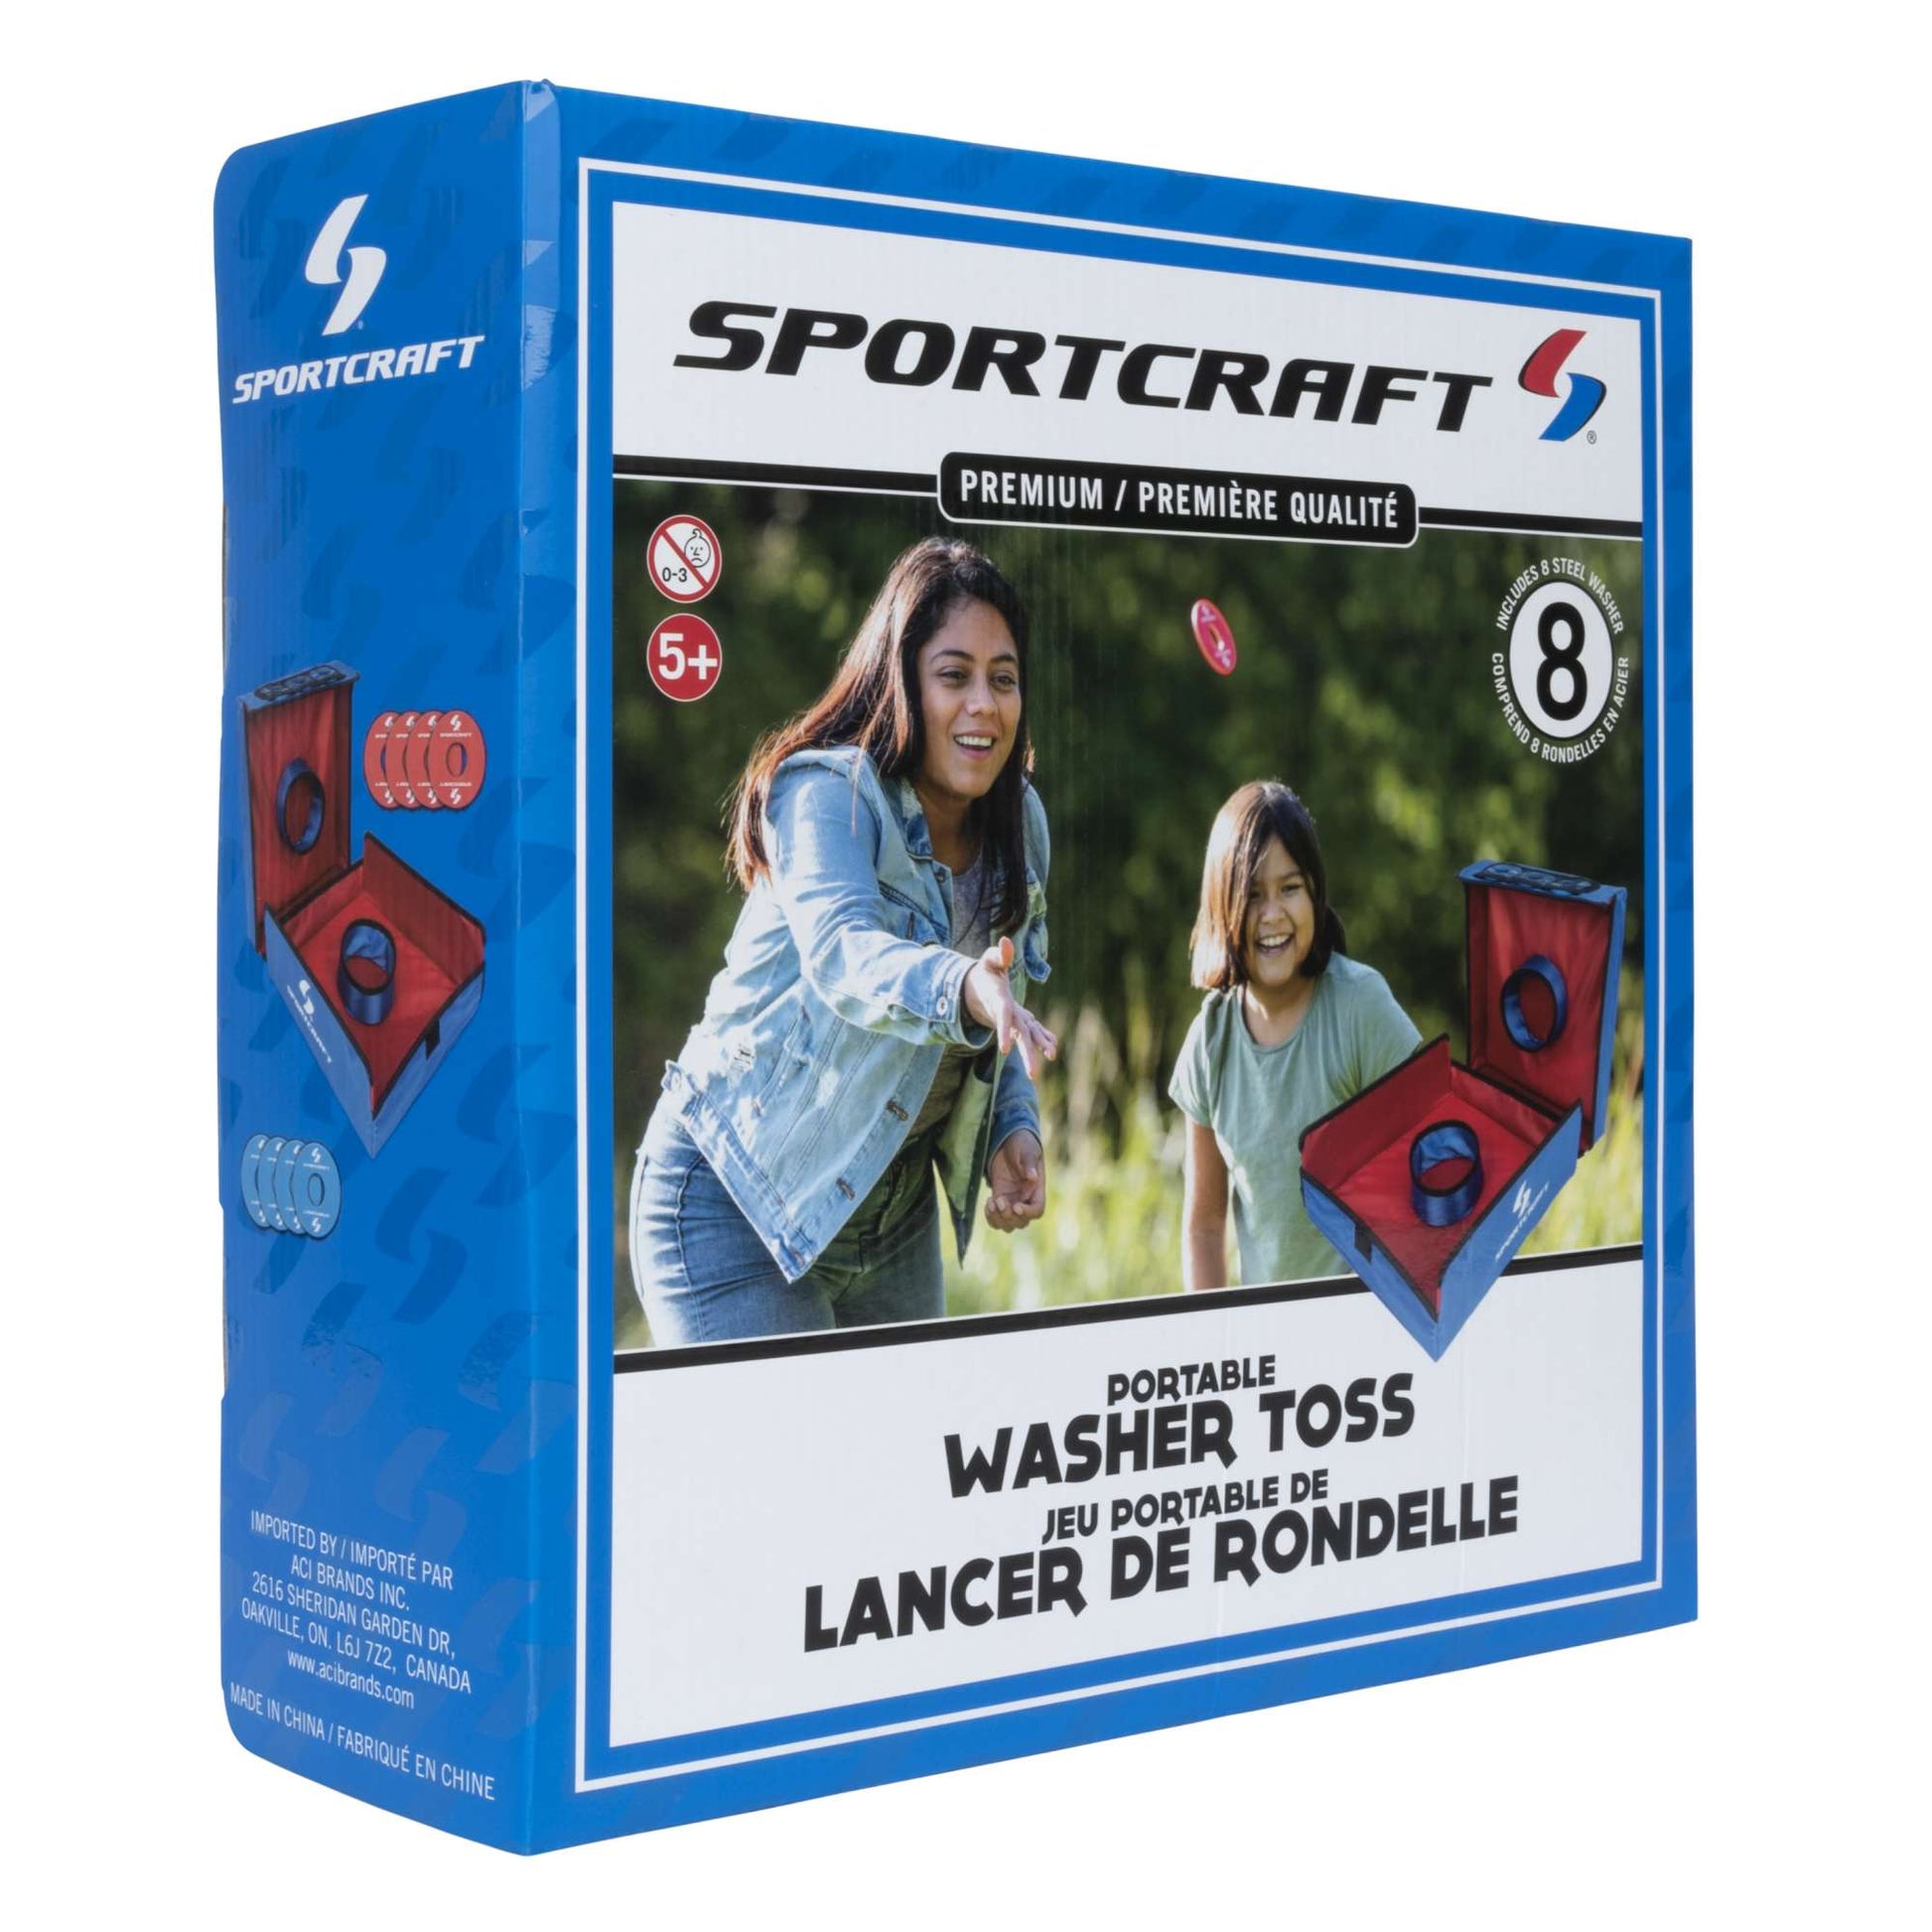 Sportcraft Washer Toss Portable game packaging